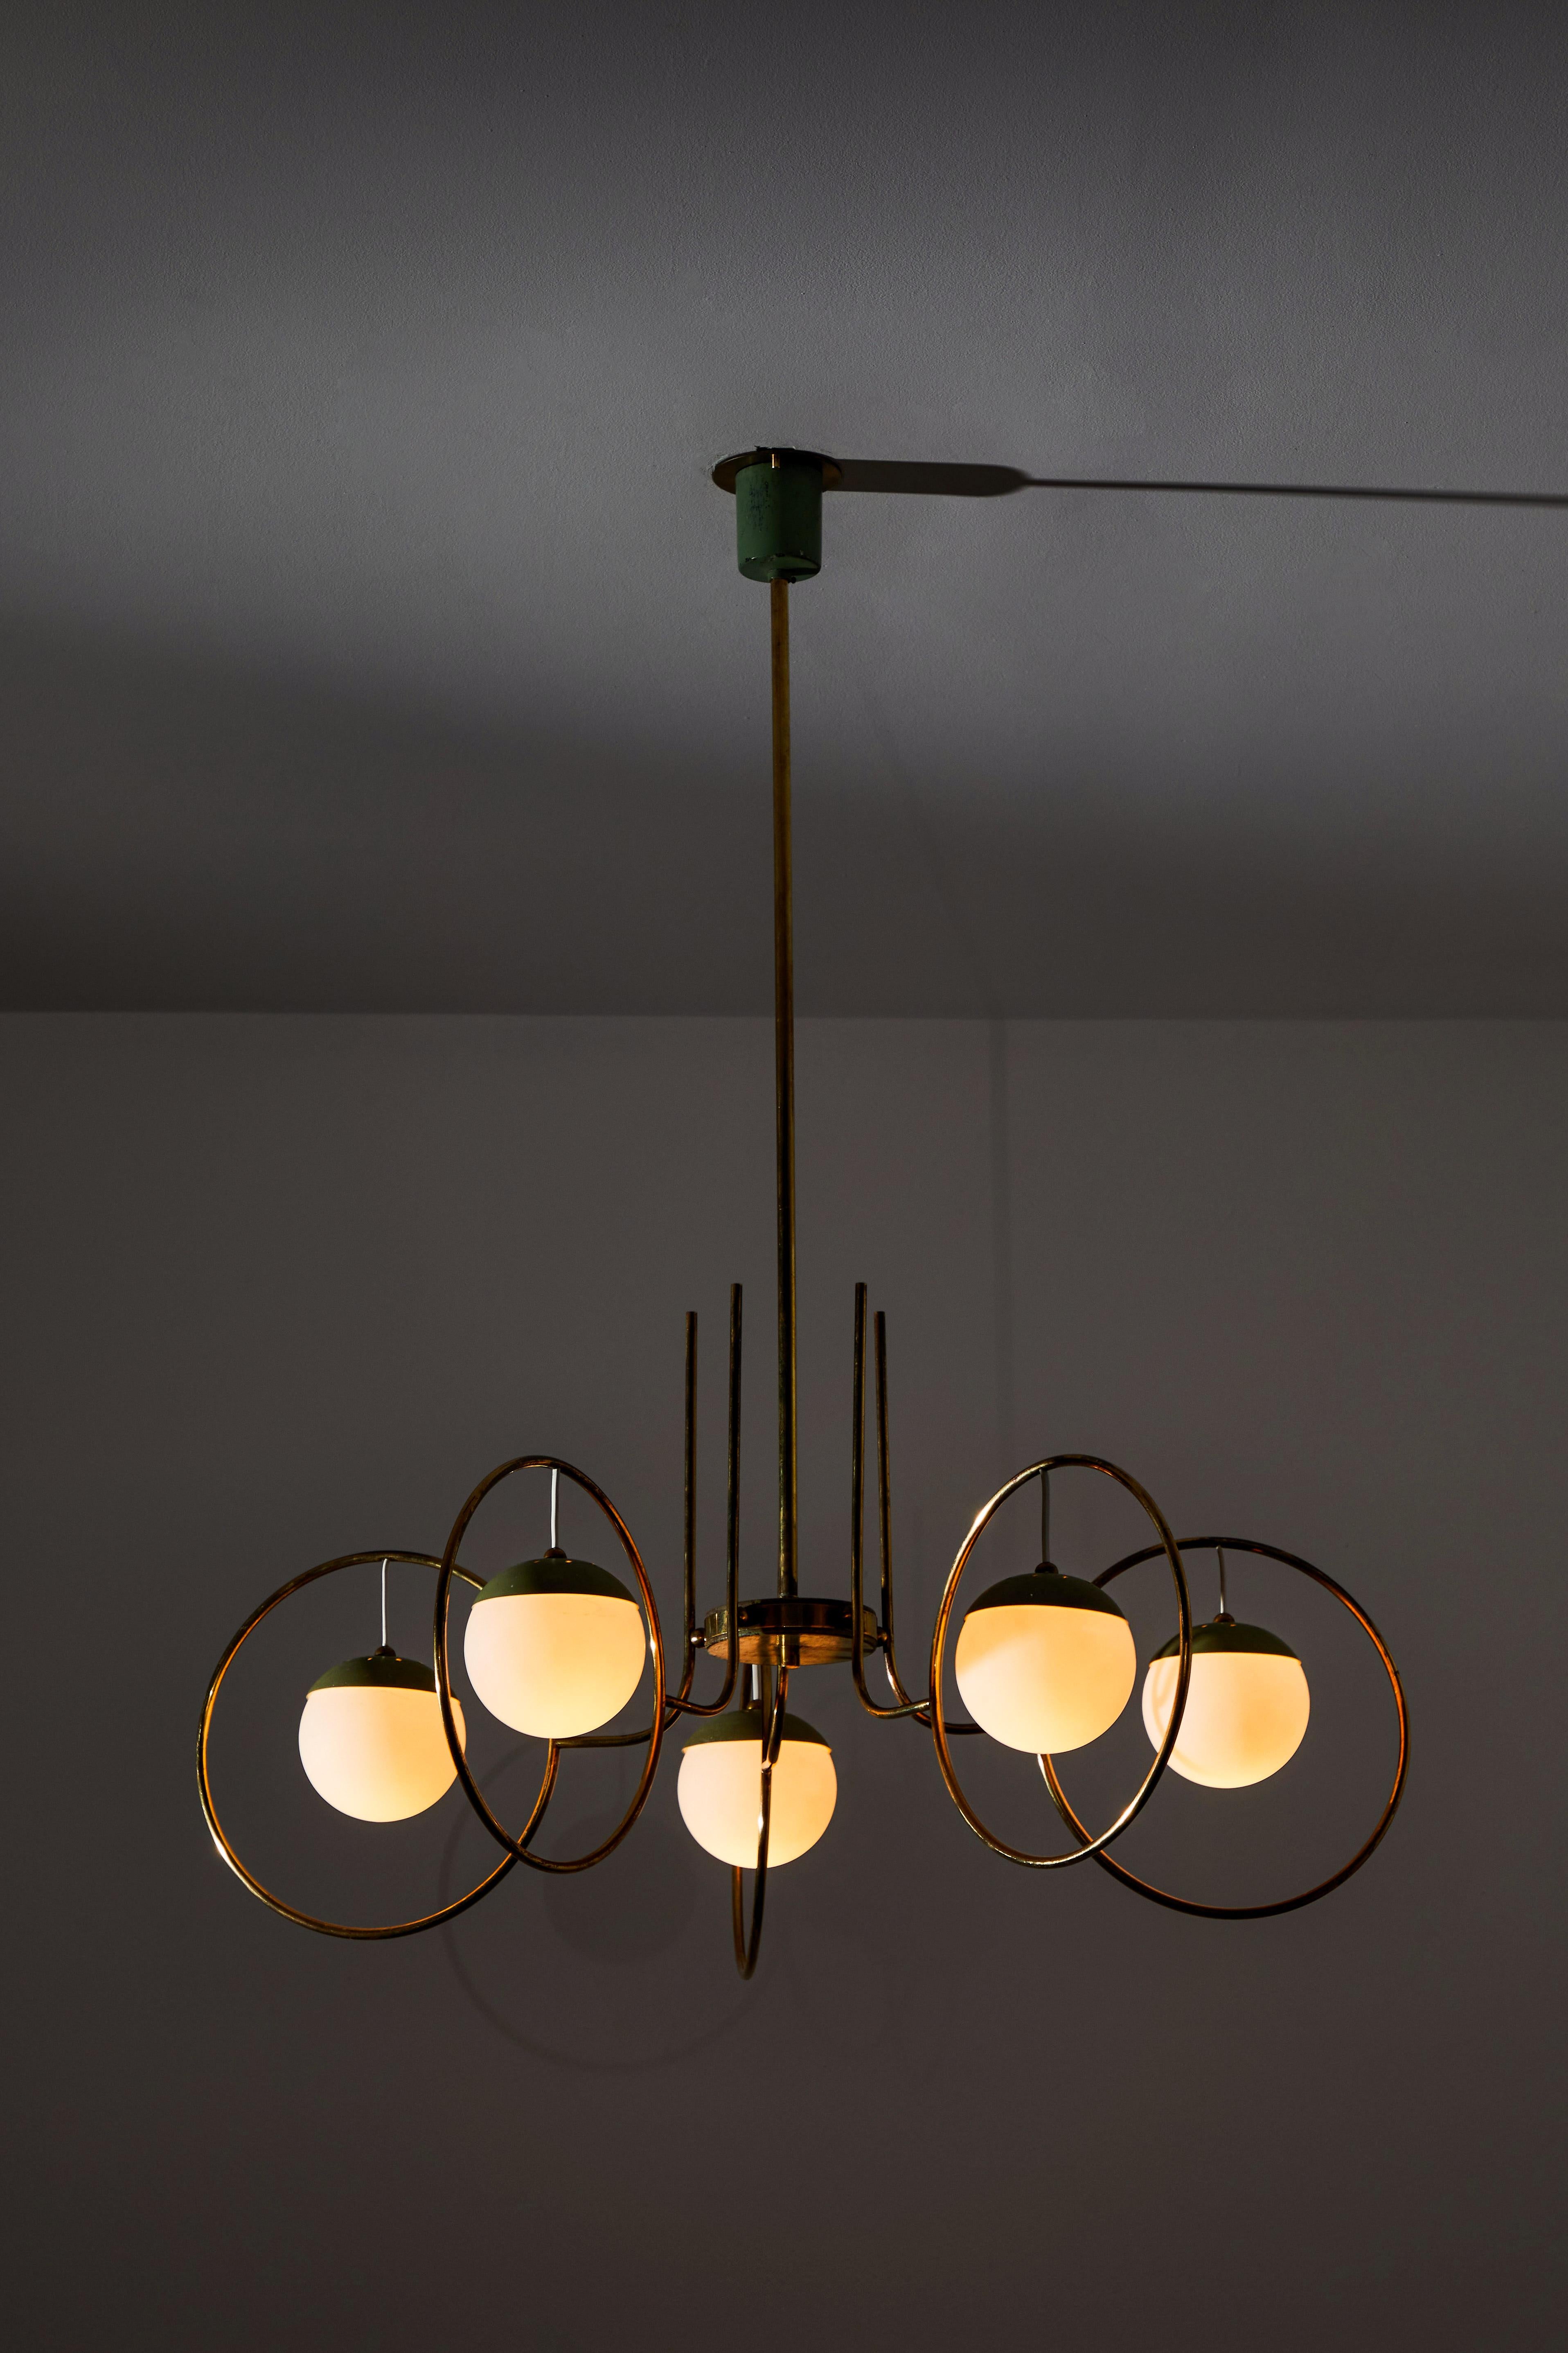 Chandelier attributed to Stilnovo, circa 1950. Manufactured in Italy. Brushed satin glass diffusers, brass, original enameled aluminum. Custom brass ceiling plate. Original canopy. Rewired for U.S. standards. We recommend five E27 40w maximum bulbs.